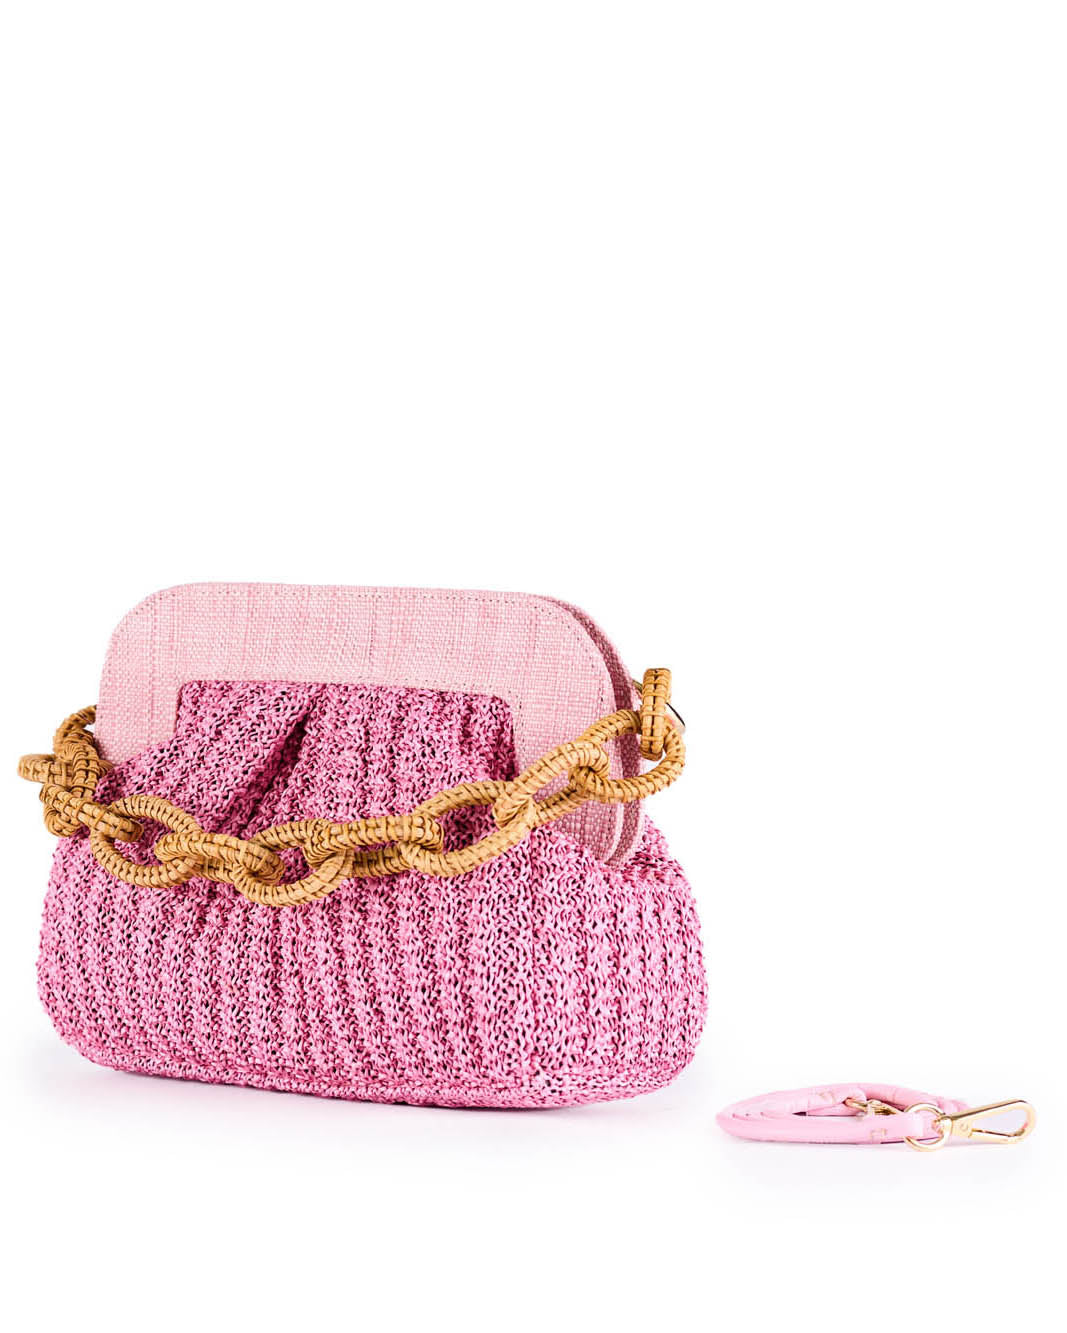 Pink woven handbag with chunky gold chain handle and matching pink keychain